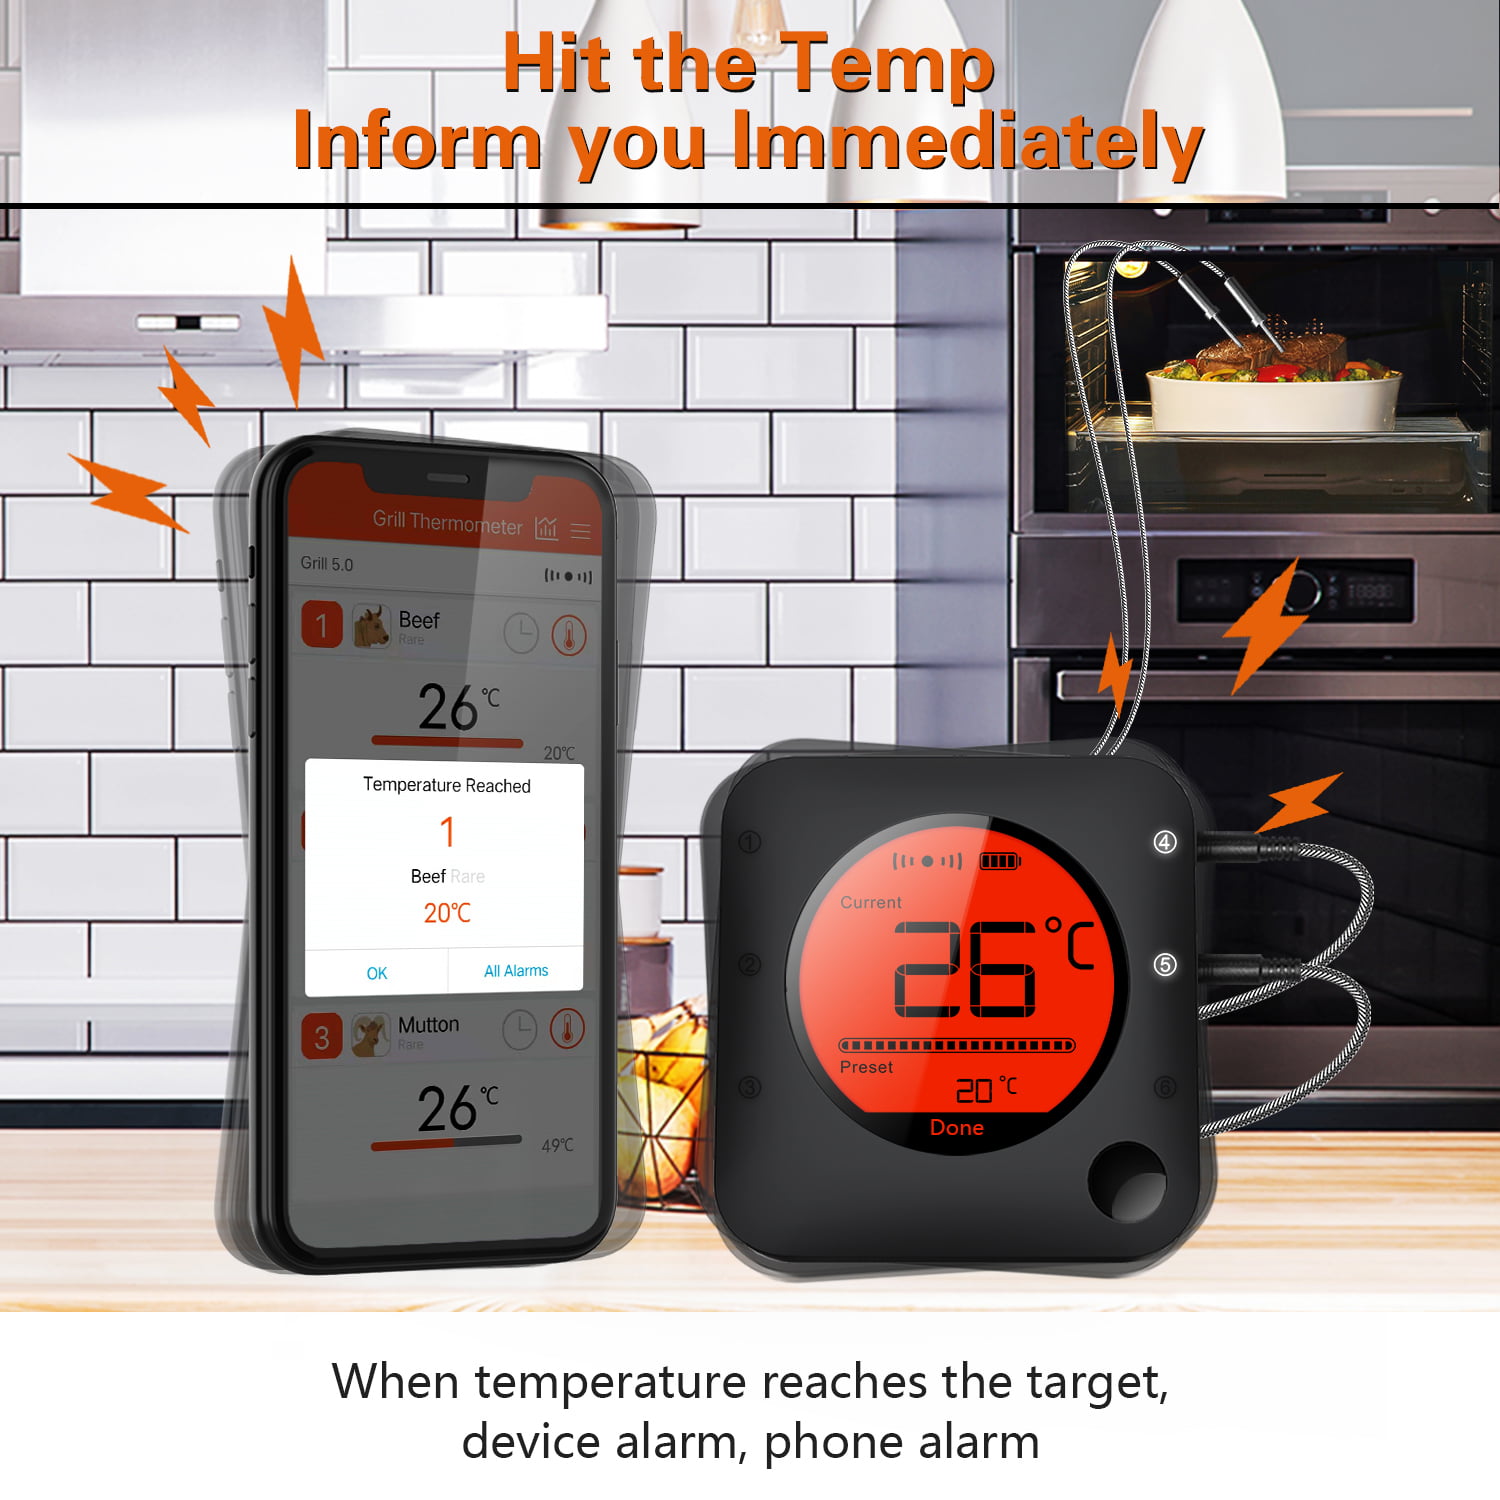 BFOUR Wireless Bluetooth Meat Thermometer Grilling Premium Digital Instant